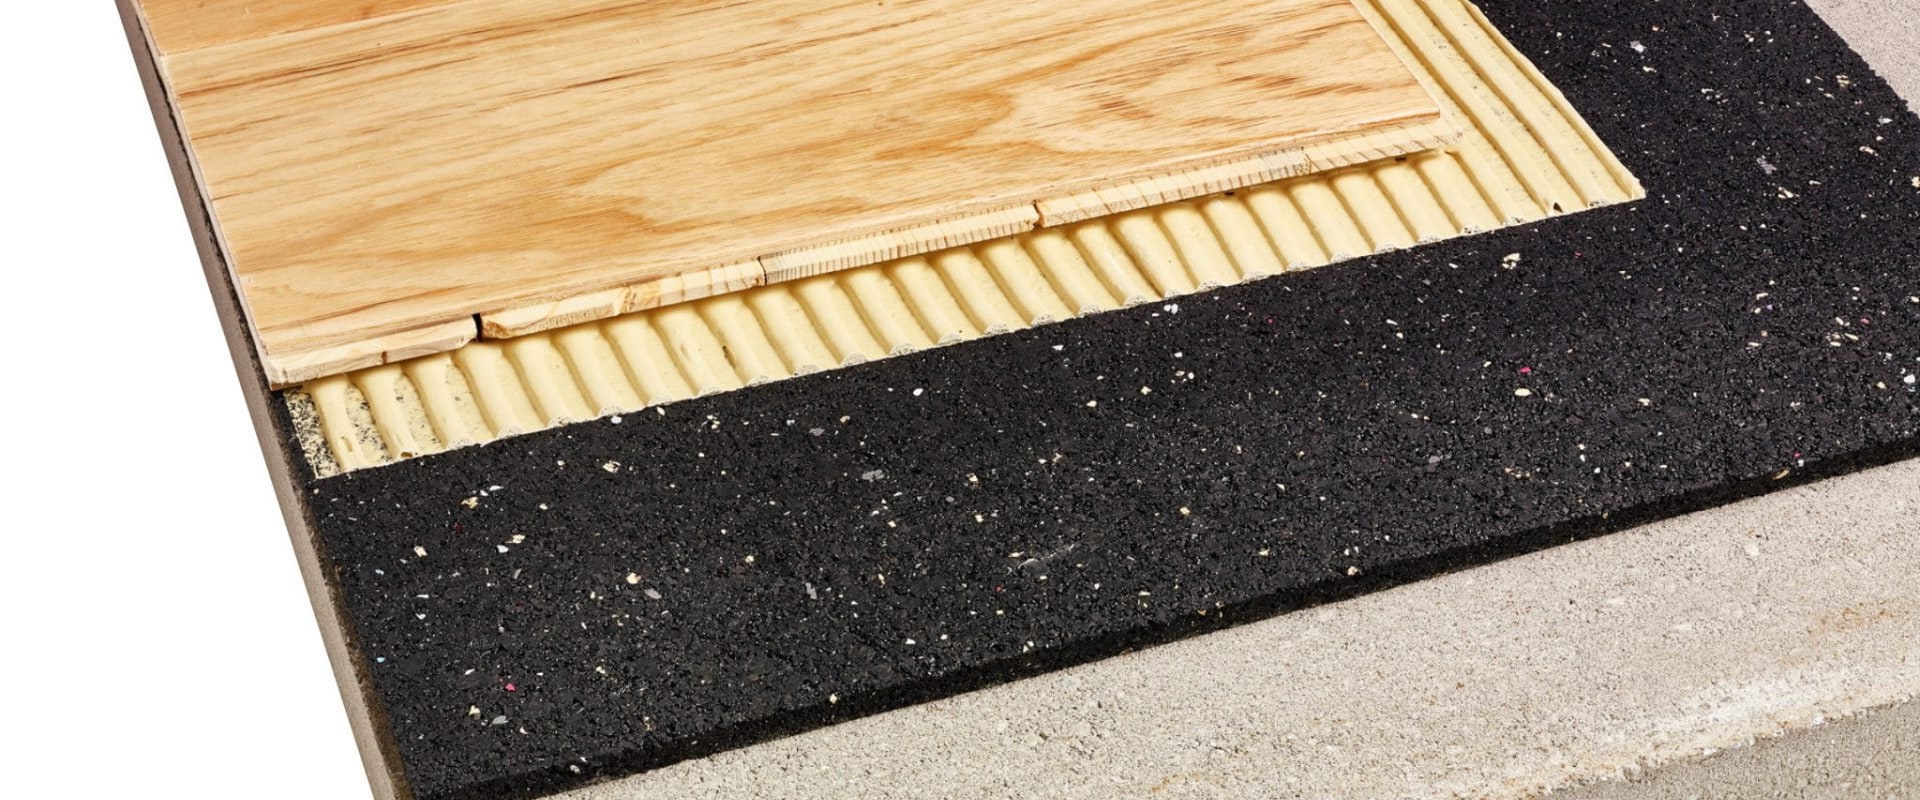 How Acoustic Underlay Can Reduce Noise